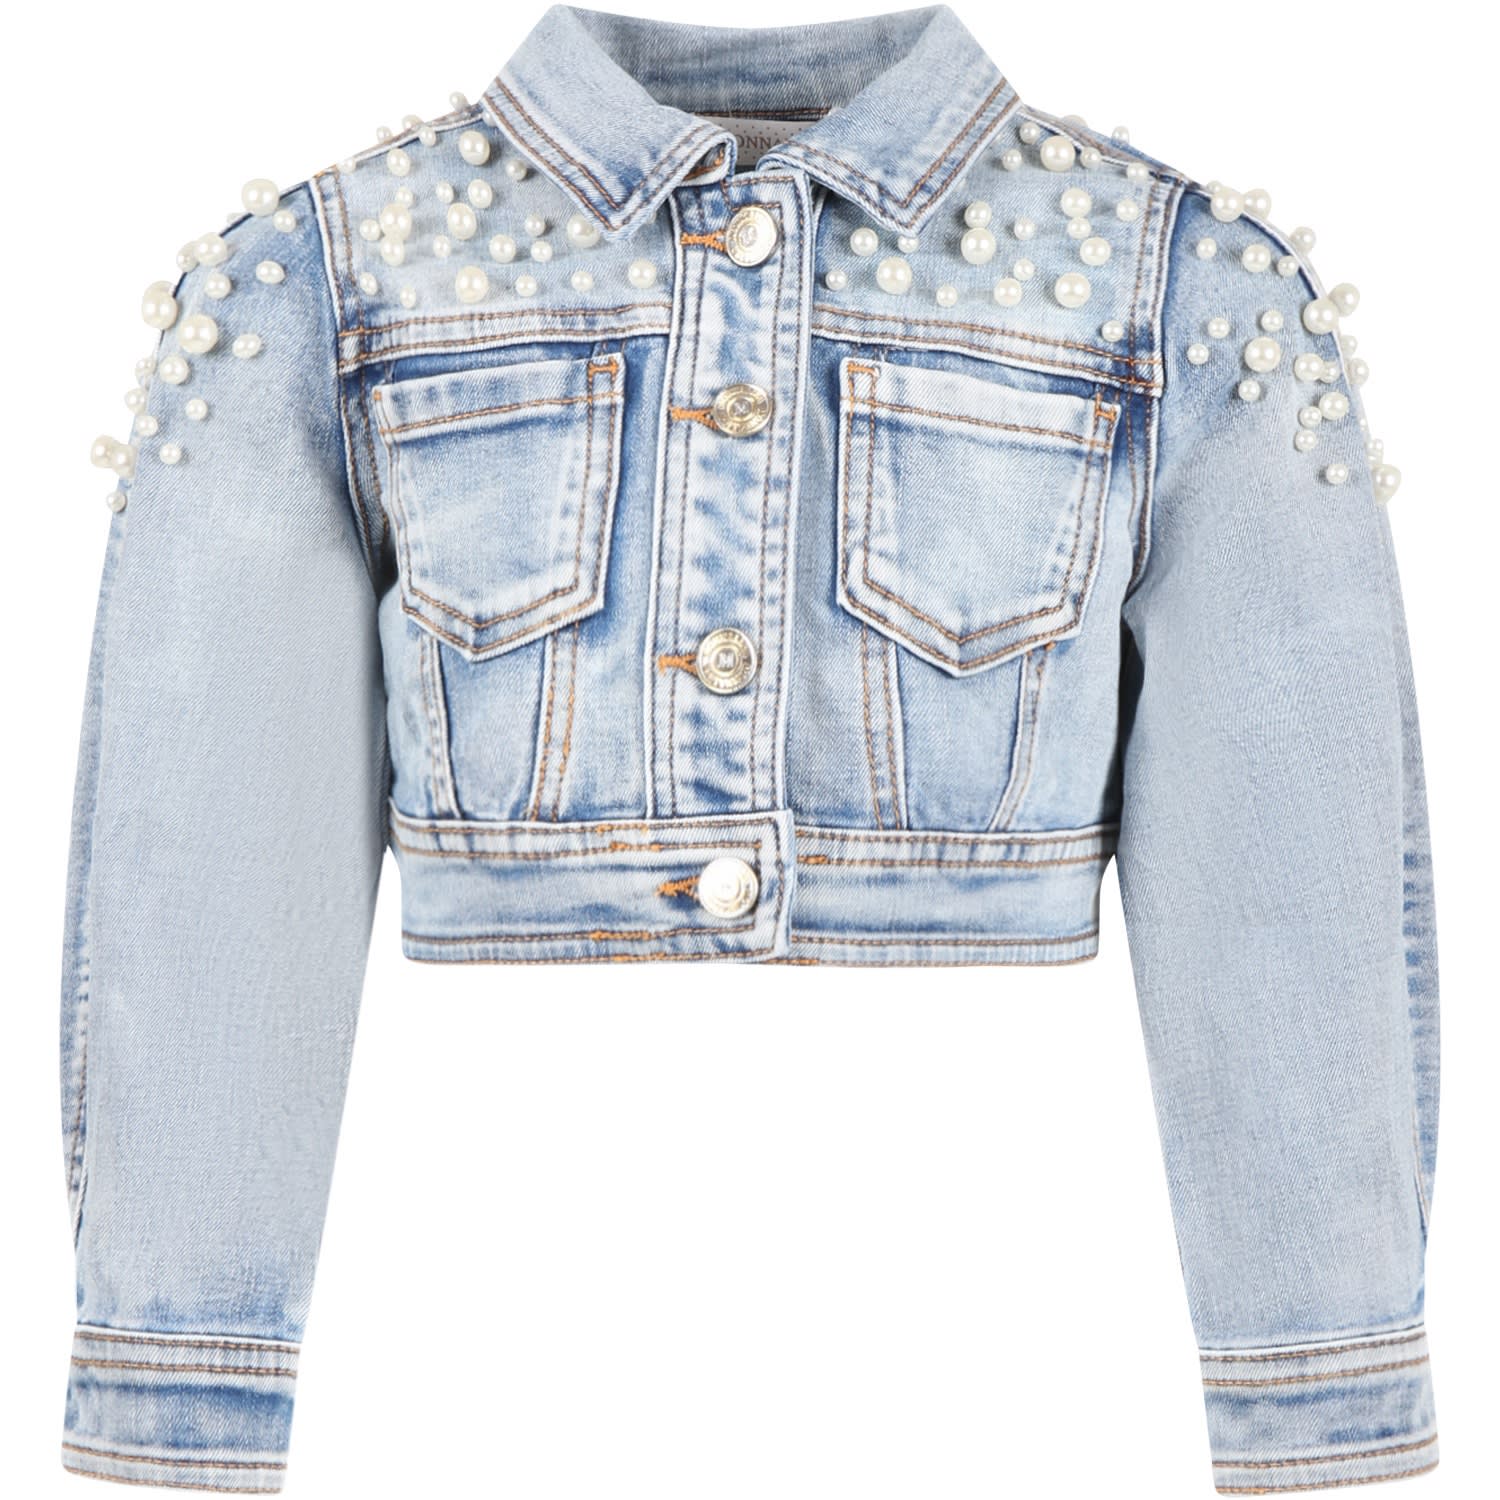 MONNALISA LIGHT-BLUE JACKET FOR GIRL WITH PEARL